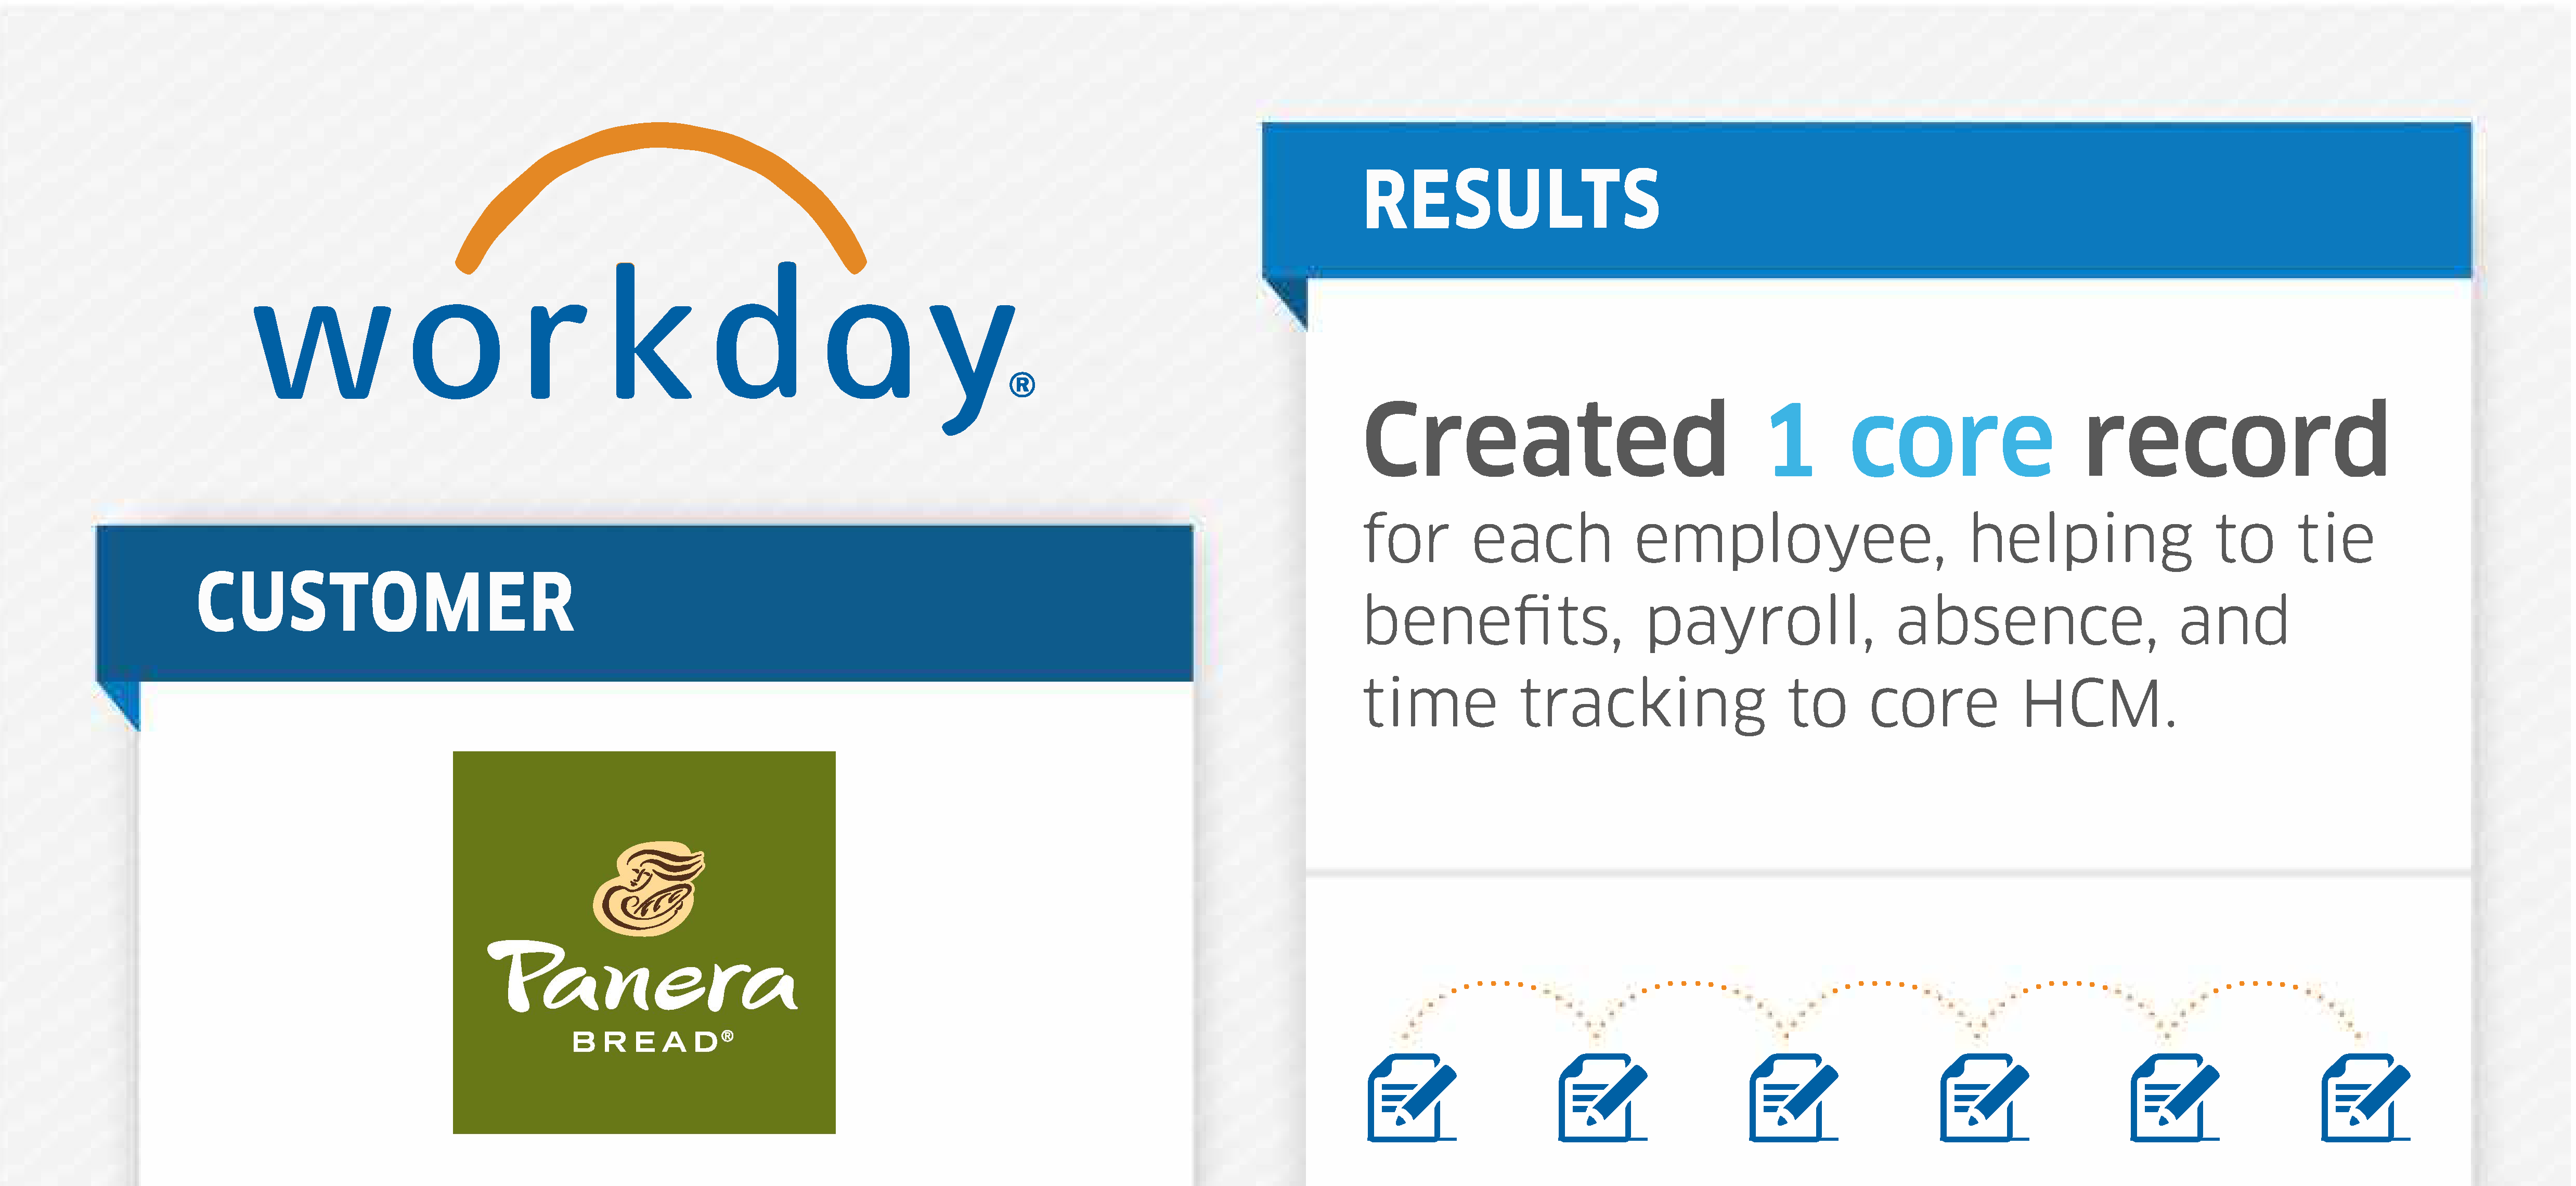 wday infographic 2016 panera 1 - How Panera Bread reduces payroll cycle time and processing costs.